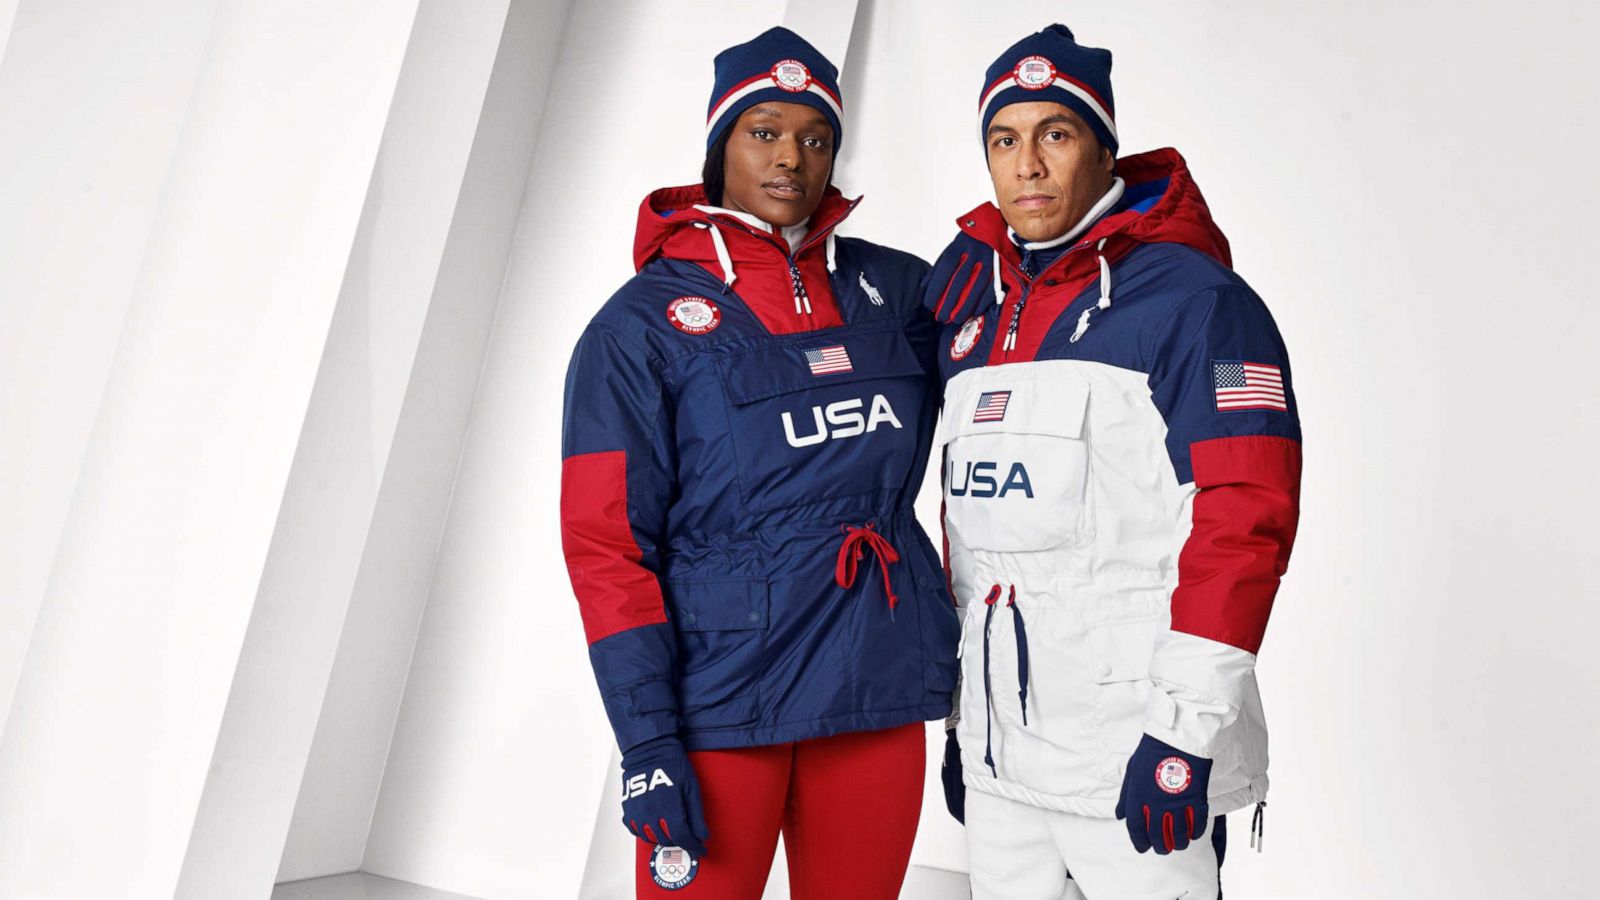 Where to buy Team USA Olympics apparel to show support in 2022